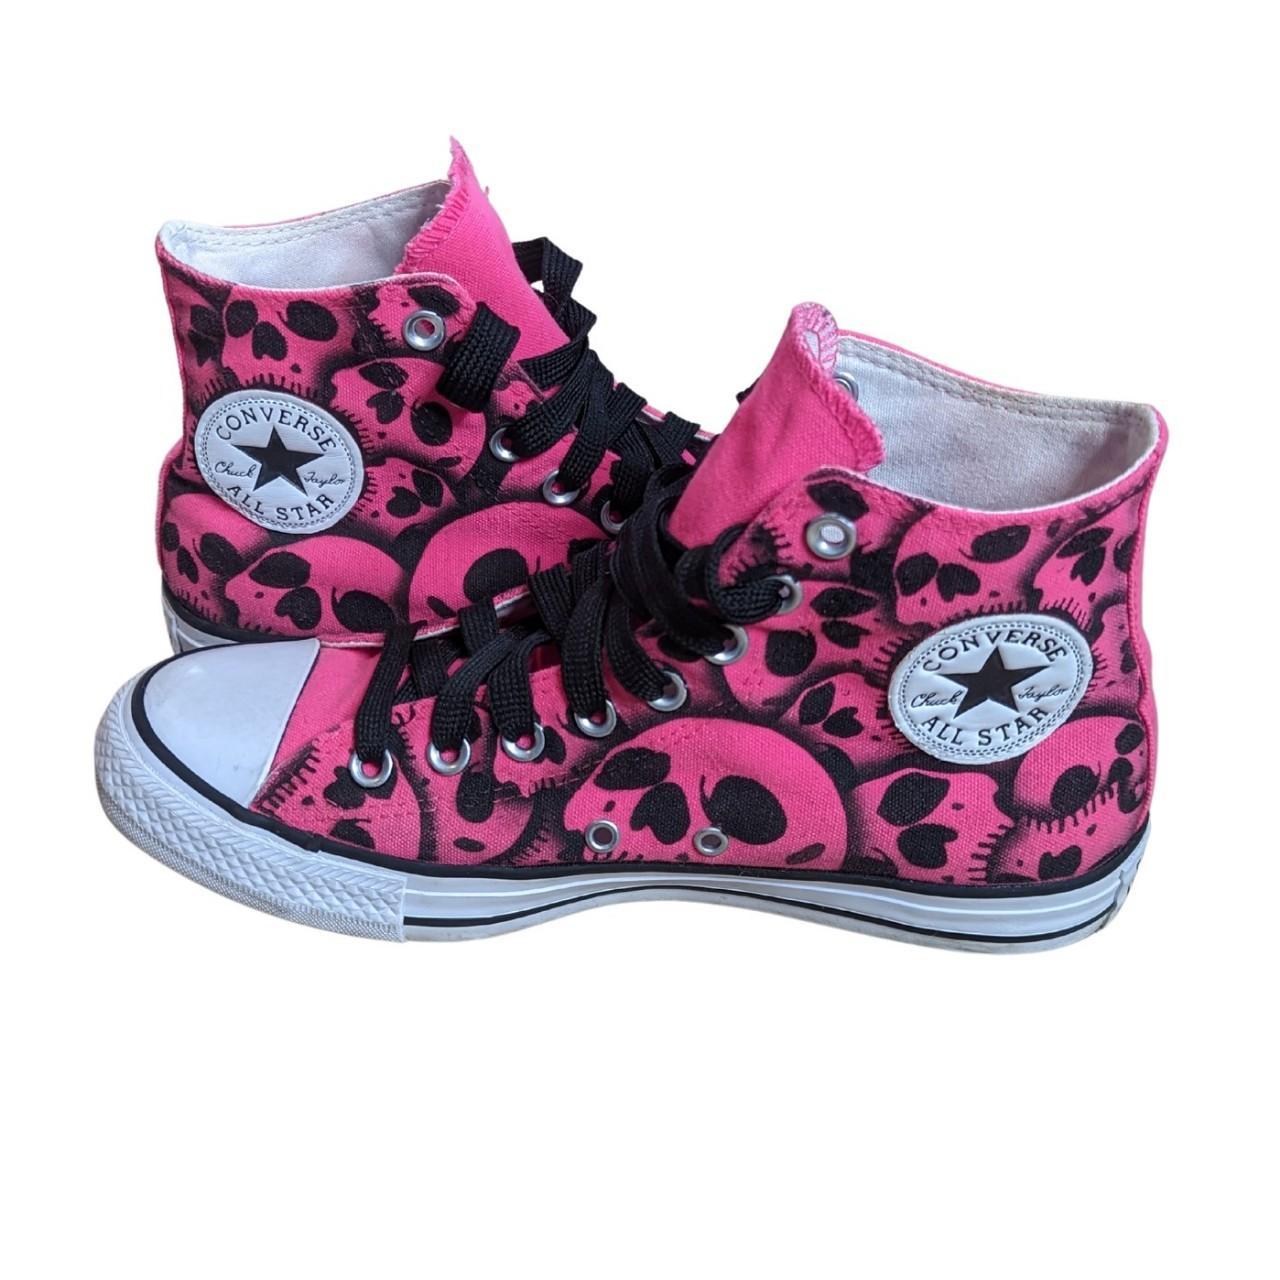 Converse Women's Black and Pink Trainers | Depop